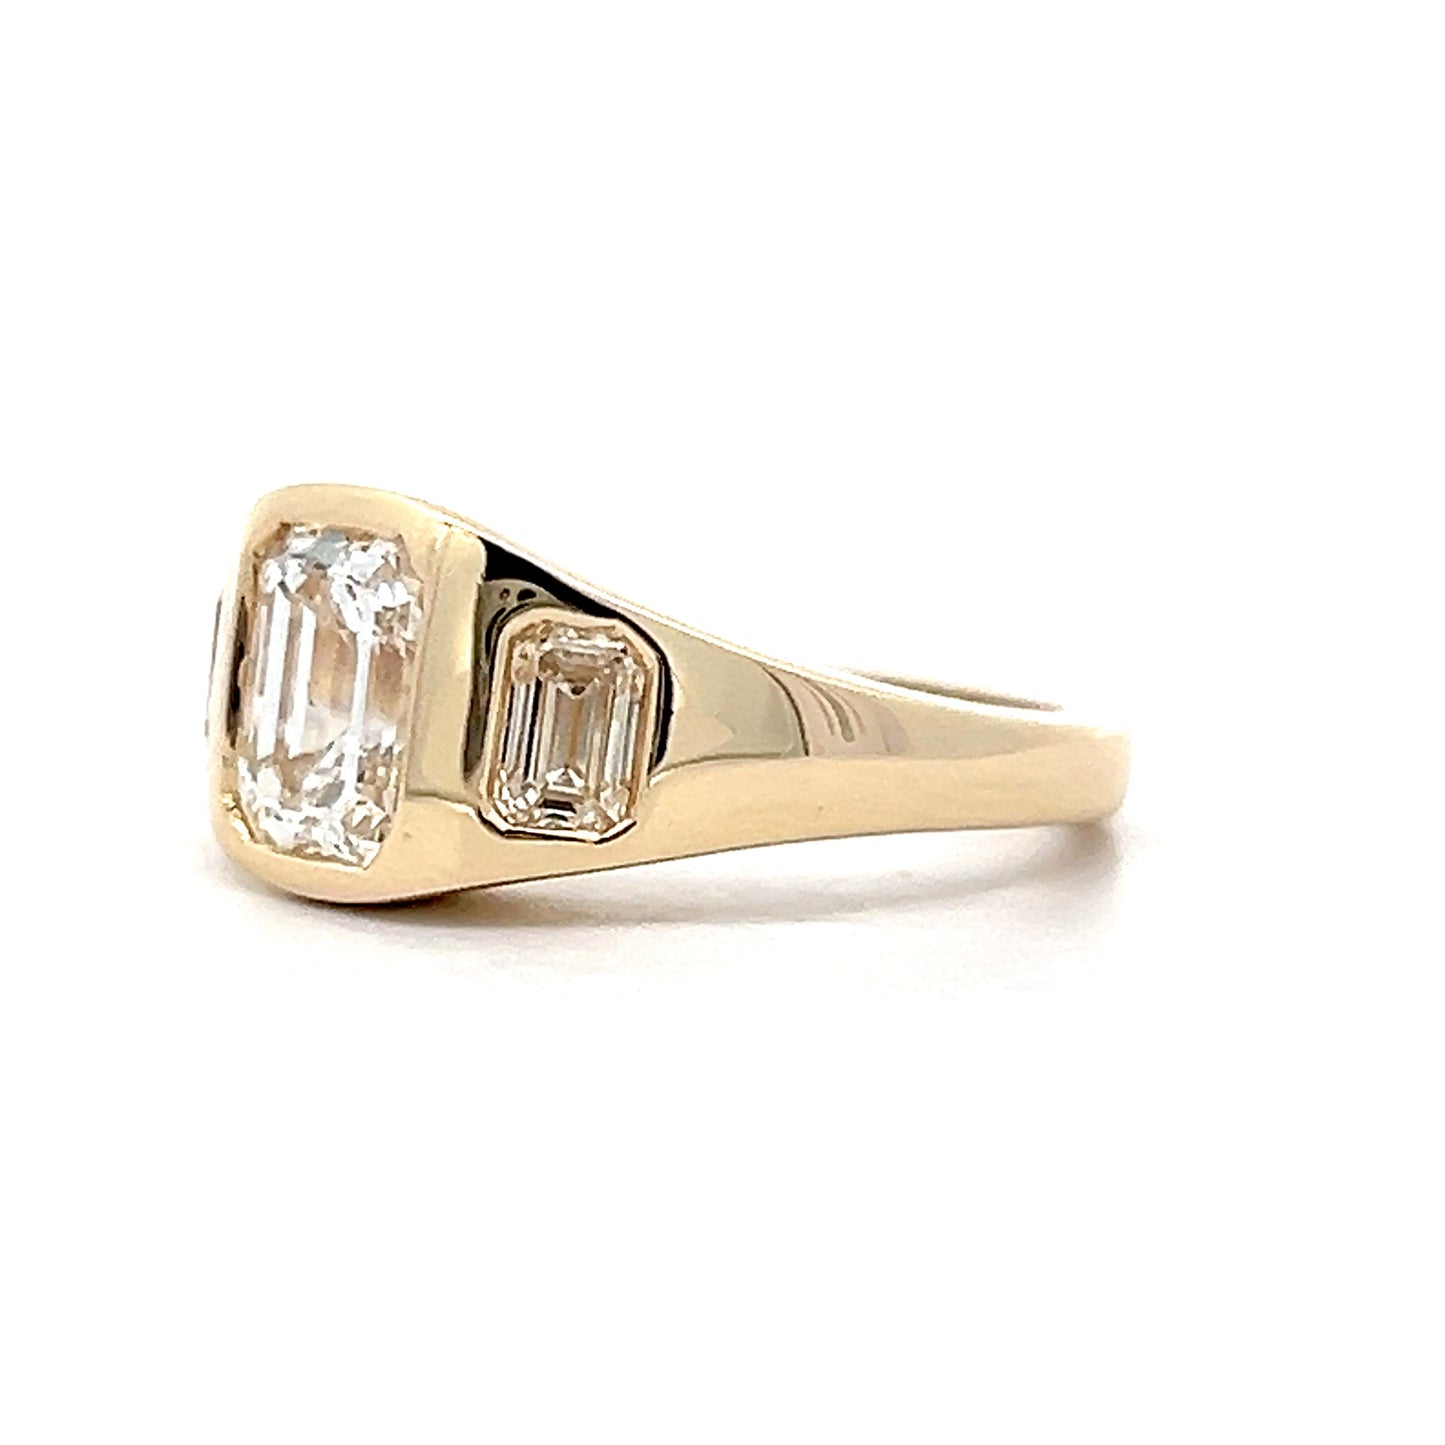 1.55 Emerald Cut Diamond Engagement Ring in Yellow Gold